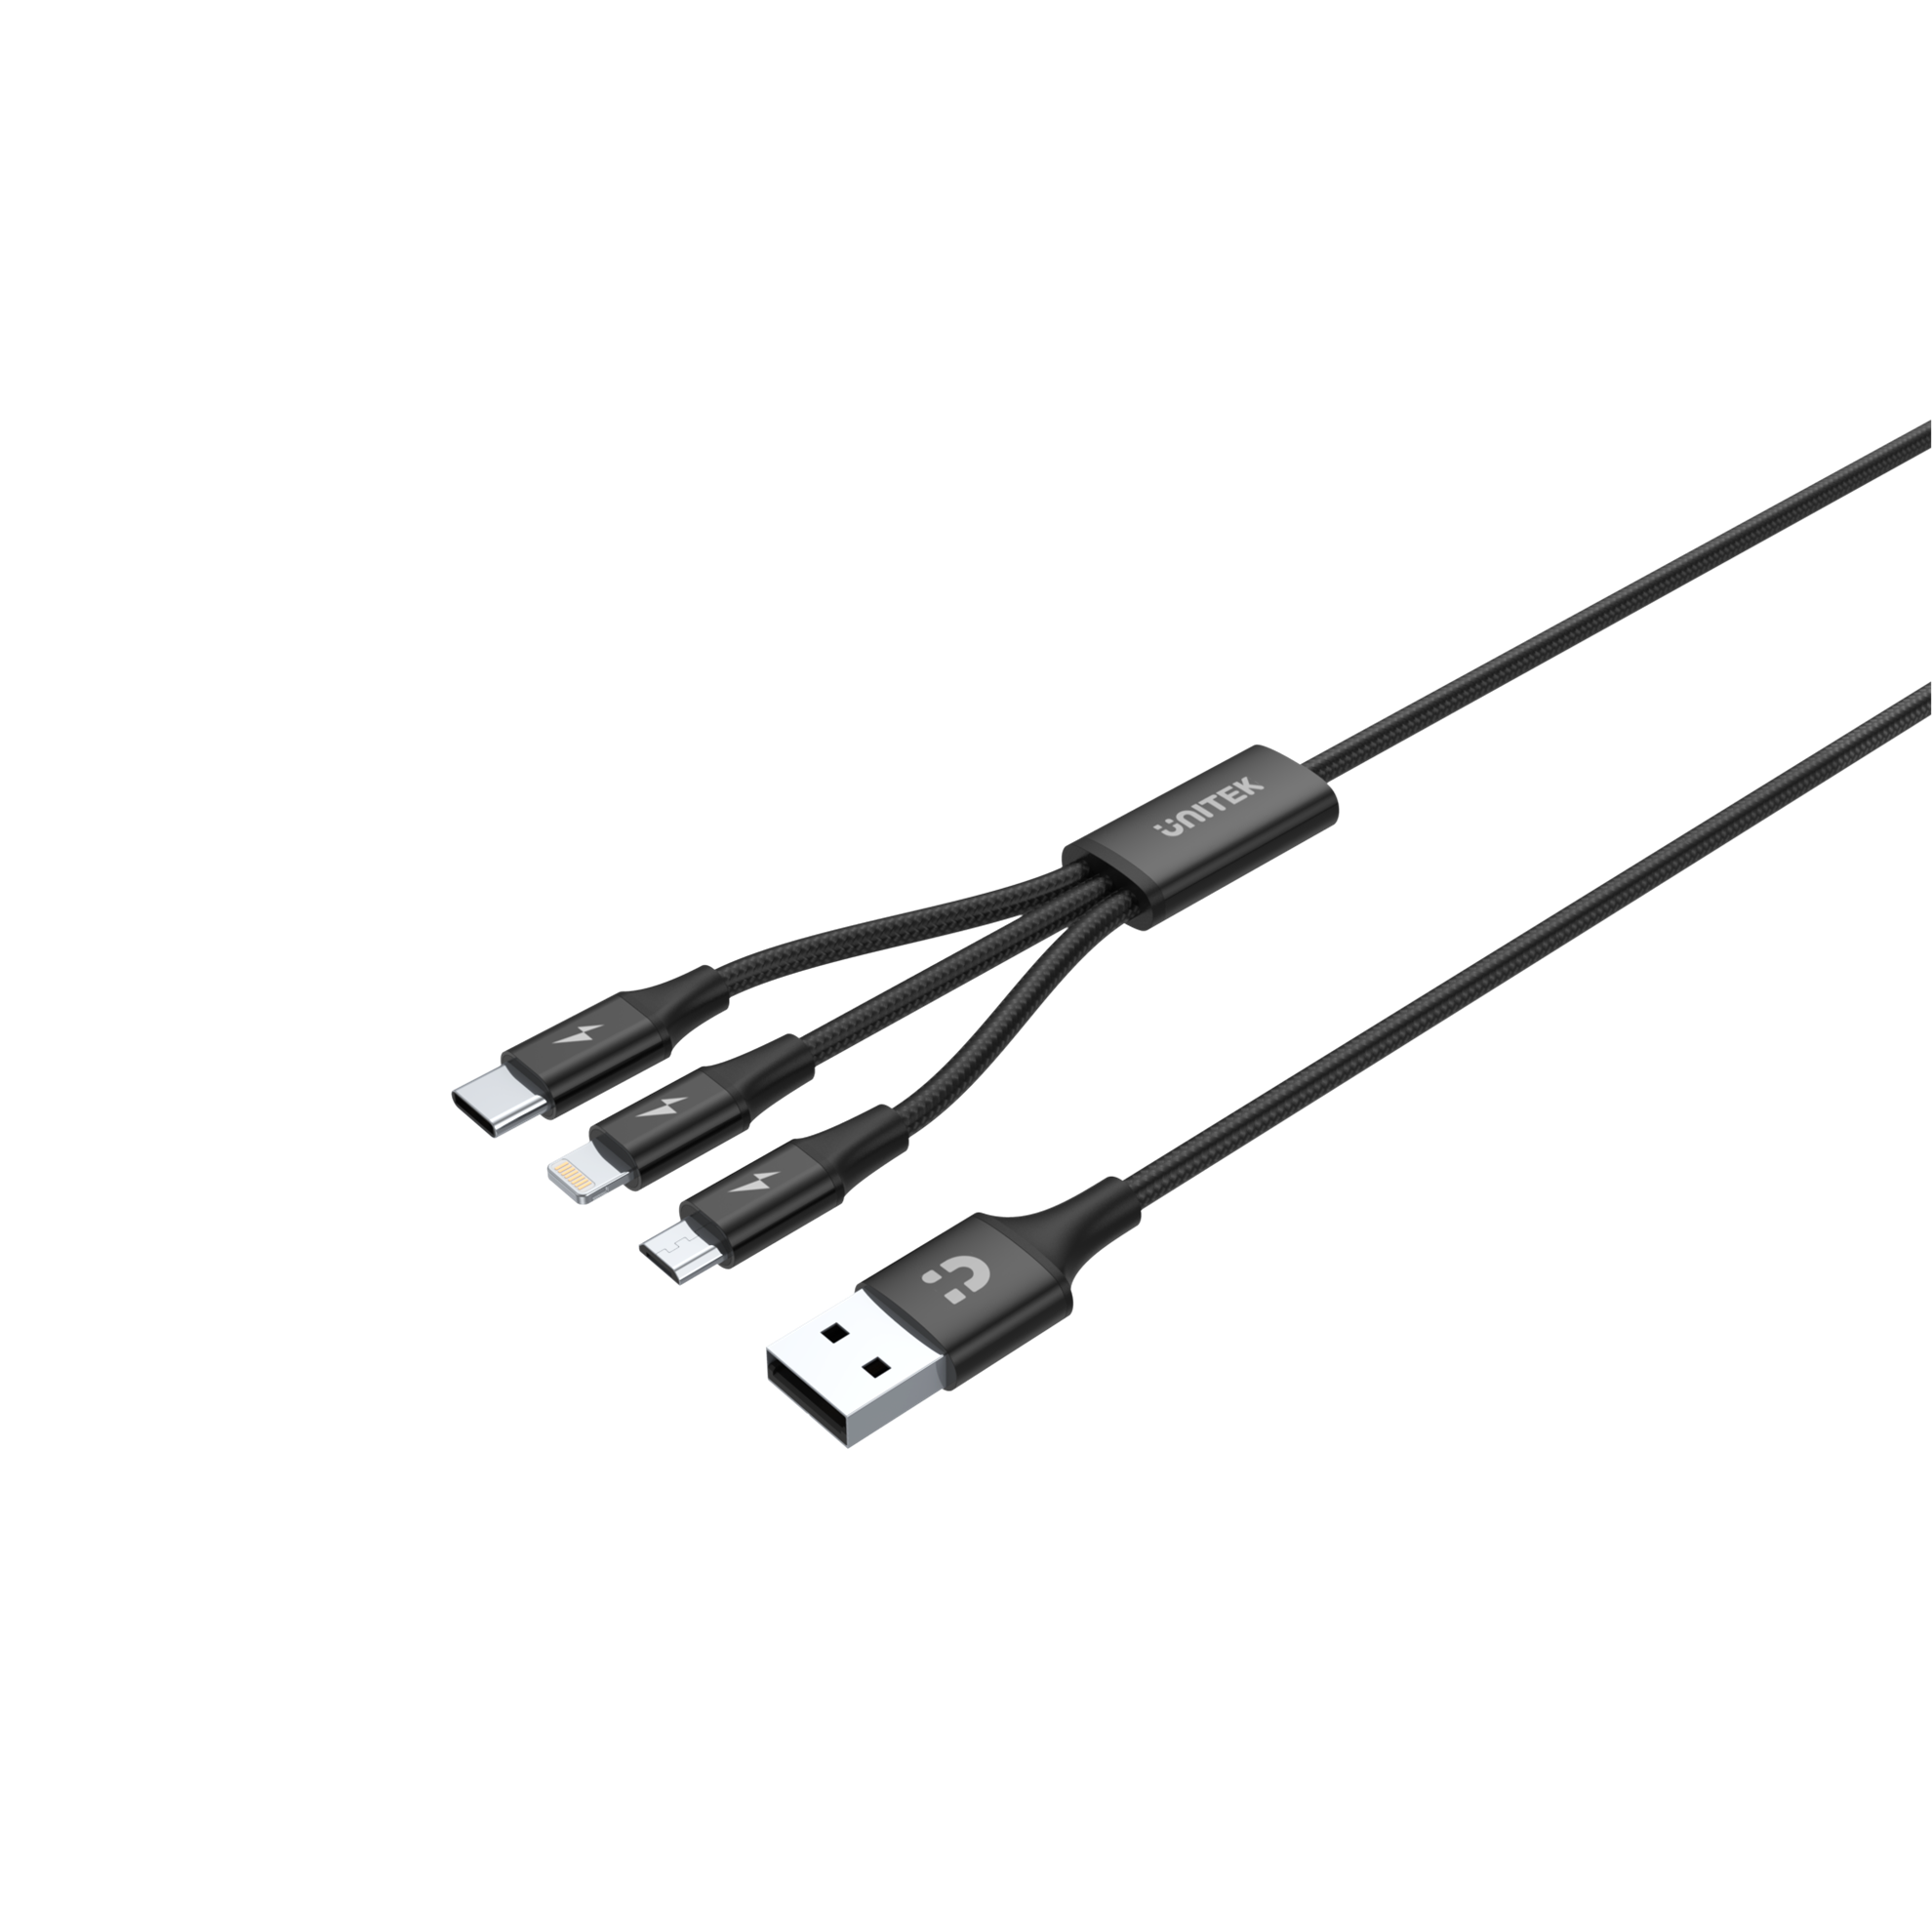 UNITEK_1.2m_USB_3-in-1_Charge_Cable._Integrated_USB-A_to_Micro-B,_Lightning_Connector_&_USB-C_Connector._Black_Colour. 271